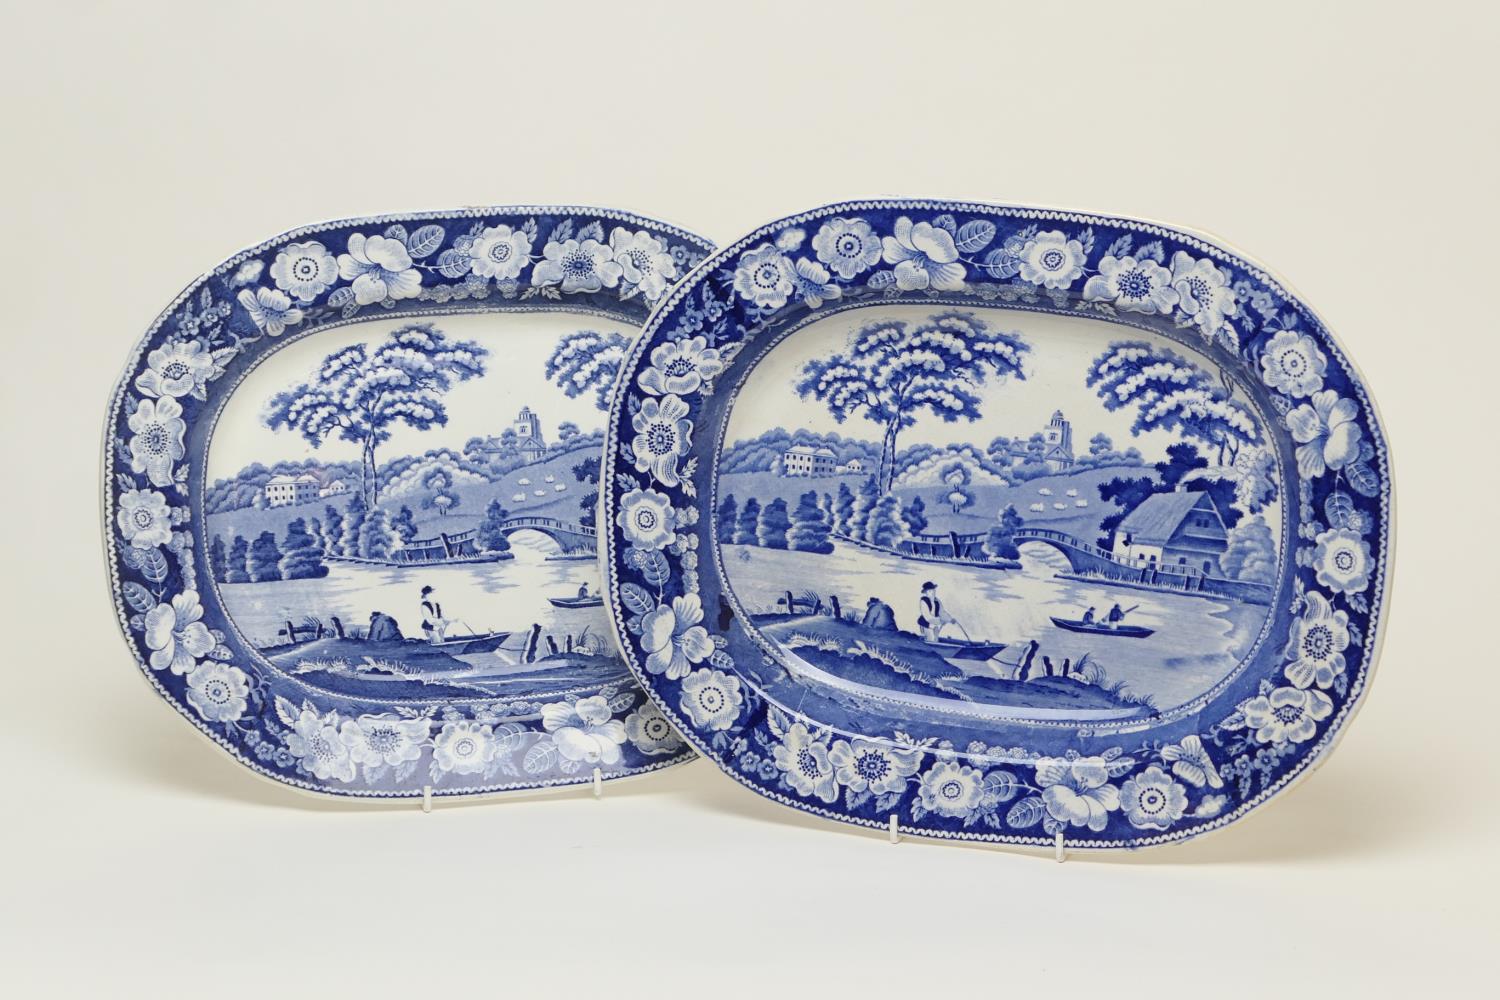 Matched pair of Staffordshire blue and white printware meat plates, circa 1830-50, in the Wild